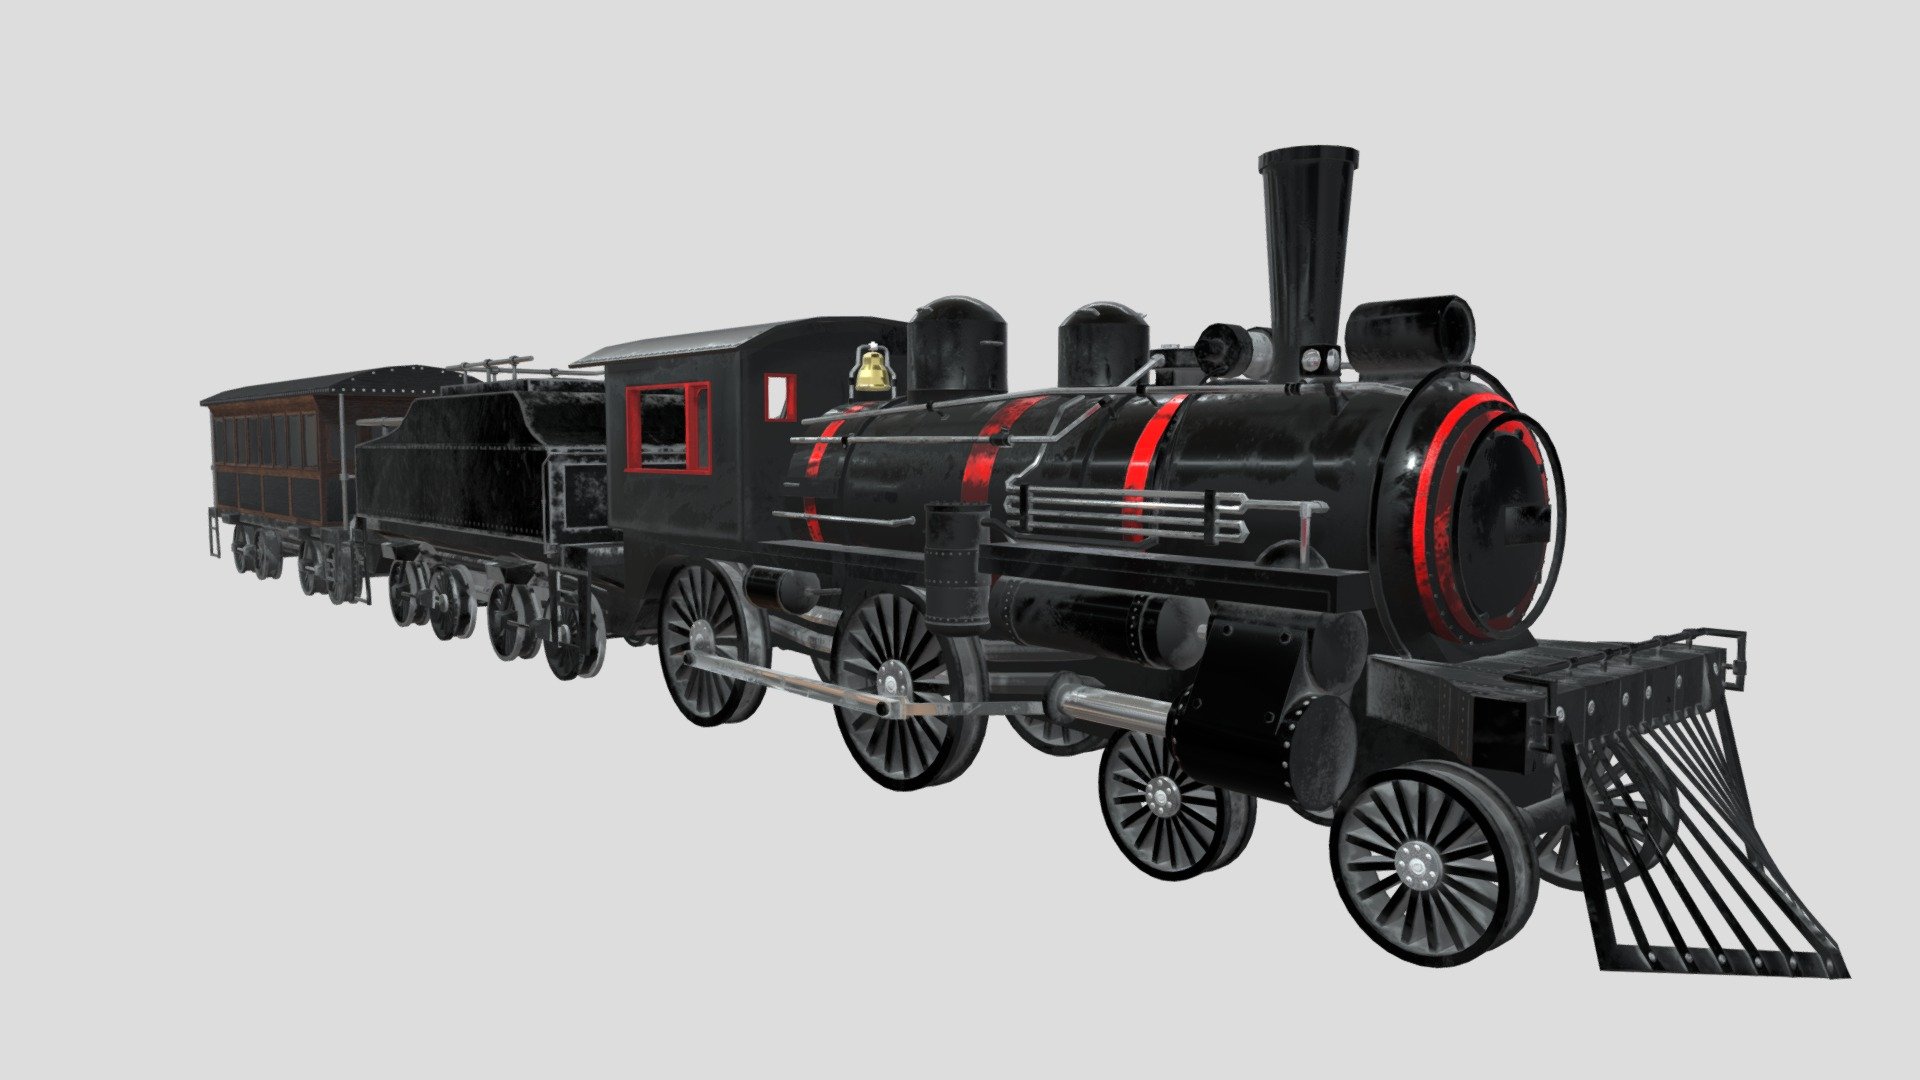 Old Steam Locomotive Train
fully texture. inside and outside, includes 2 wagons low poly - Old Steam Locomotive Train - 3D model by Parnoico 3d model